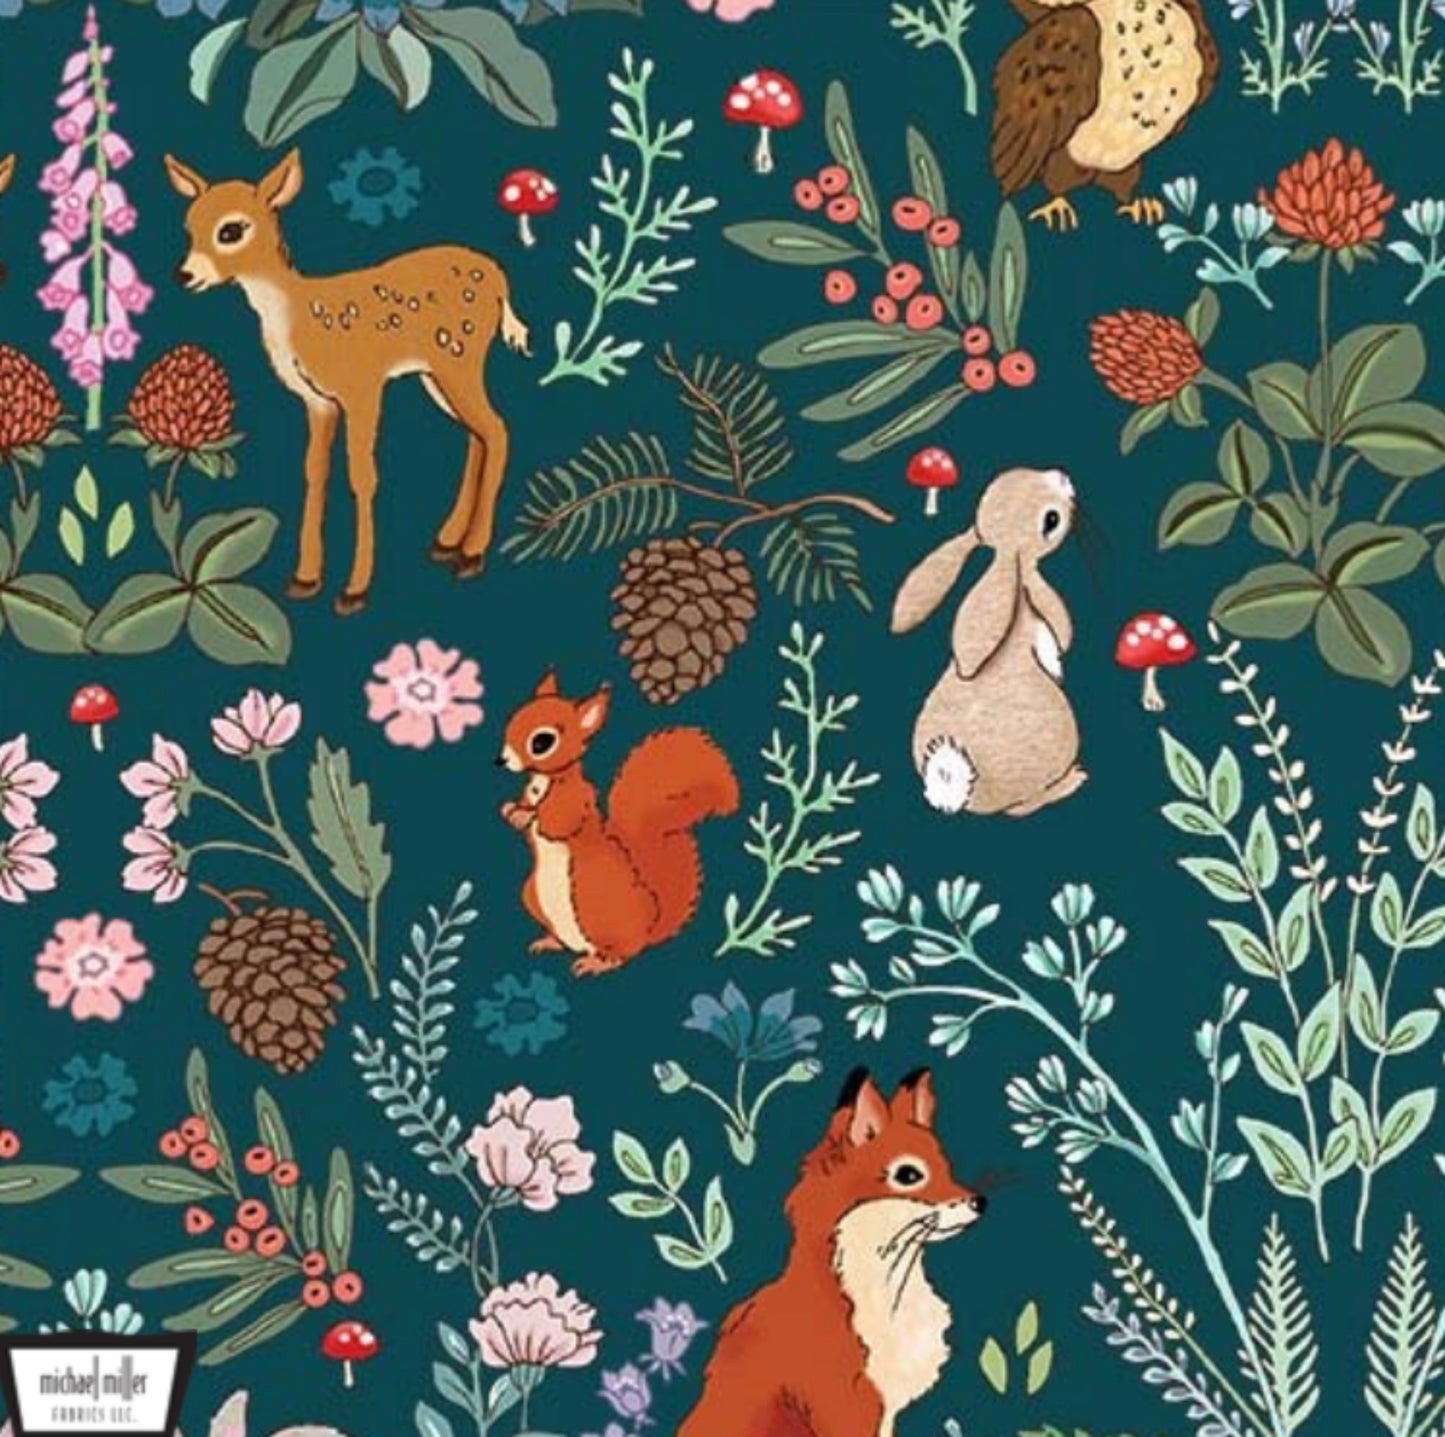 Forest Adventure Fabric from the Midnight Forest Collection - Michael Miller Fabrics. Adorable forest animals on a deep green background.